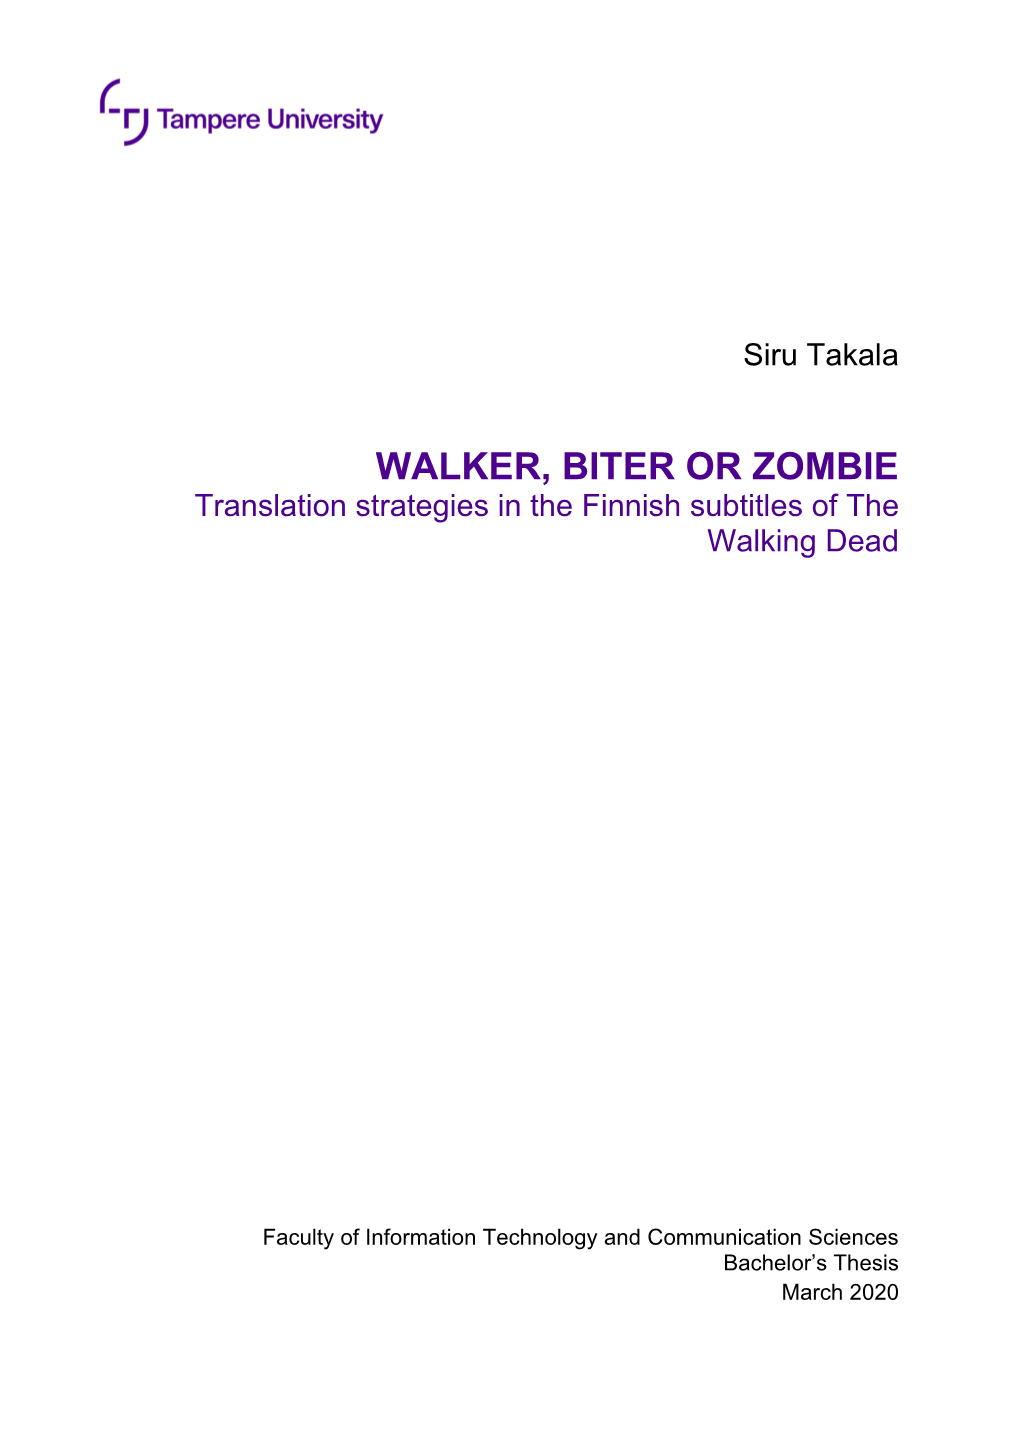 WALKER, BITER OR ZOMBIE Translation Strategies in the Finnish Subtitles of the Walking Dead